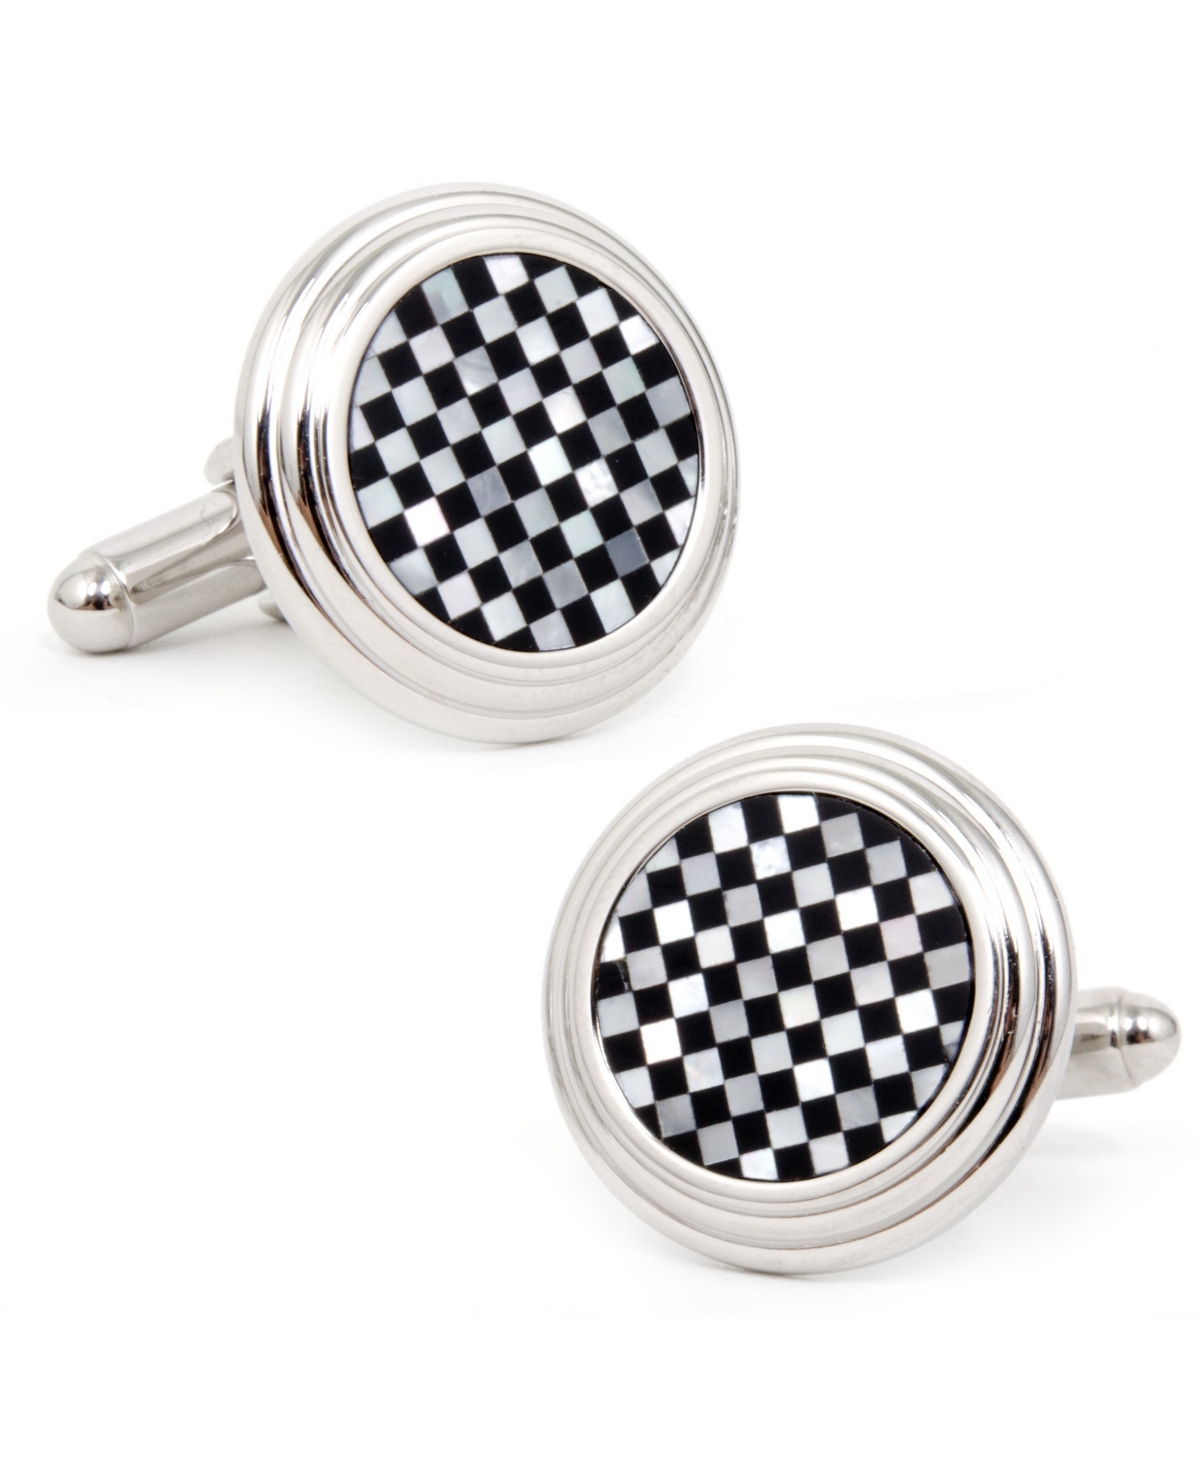 Onyx and Mother of Pearl Checker Step Cufflinks - Black